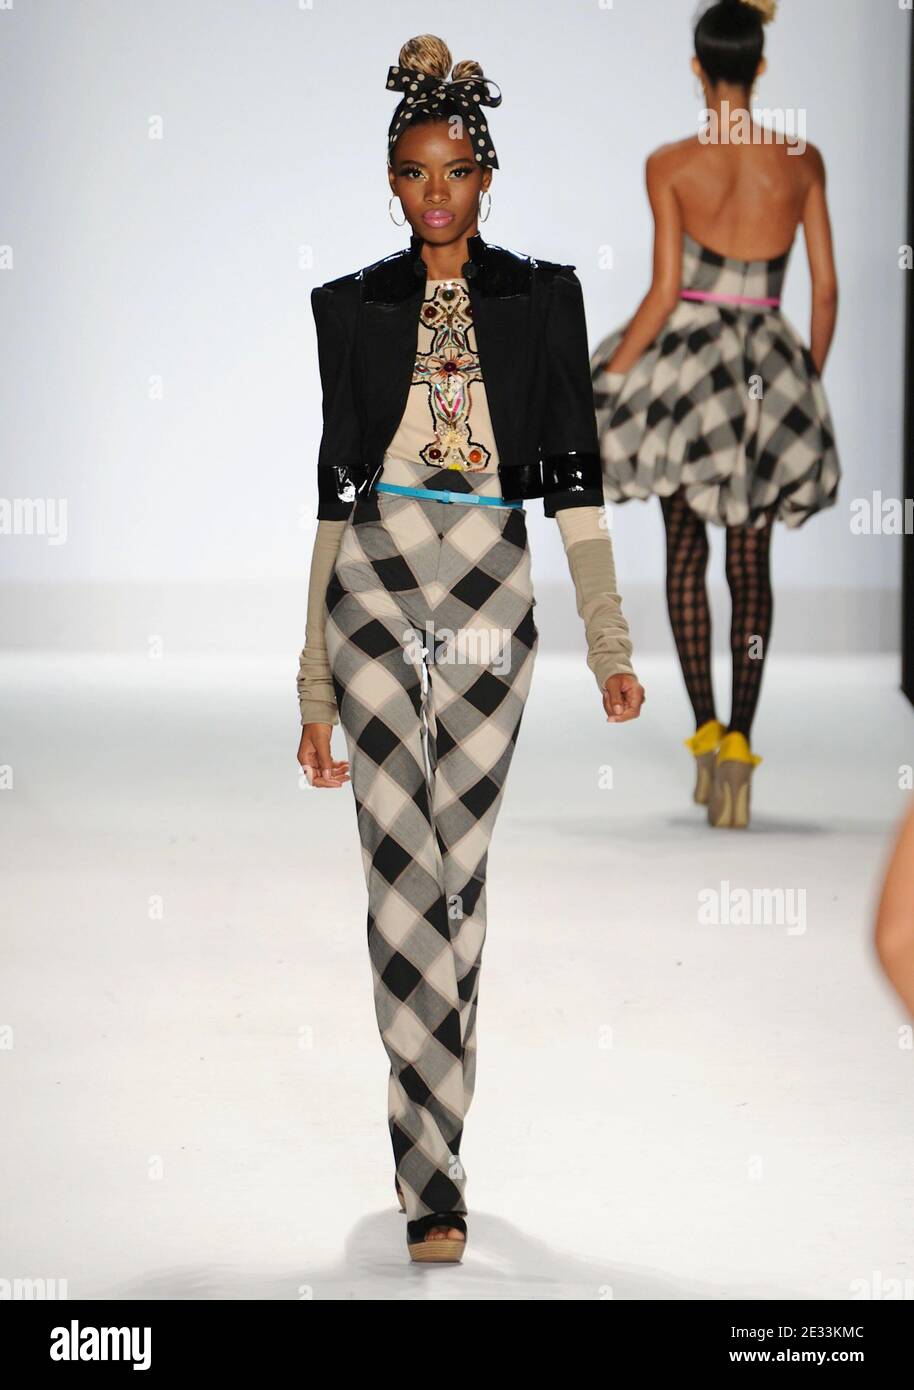 A model displays a creation by Mondo Guerra during the Project Runway Season Finale held during Mercedes Benz New York Fashion Week at the Lincoln Center in New York on September 09, 2010. Photo by Graylock/ABACAPRESS.COM Stock Photo